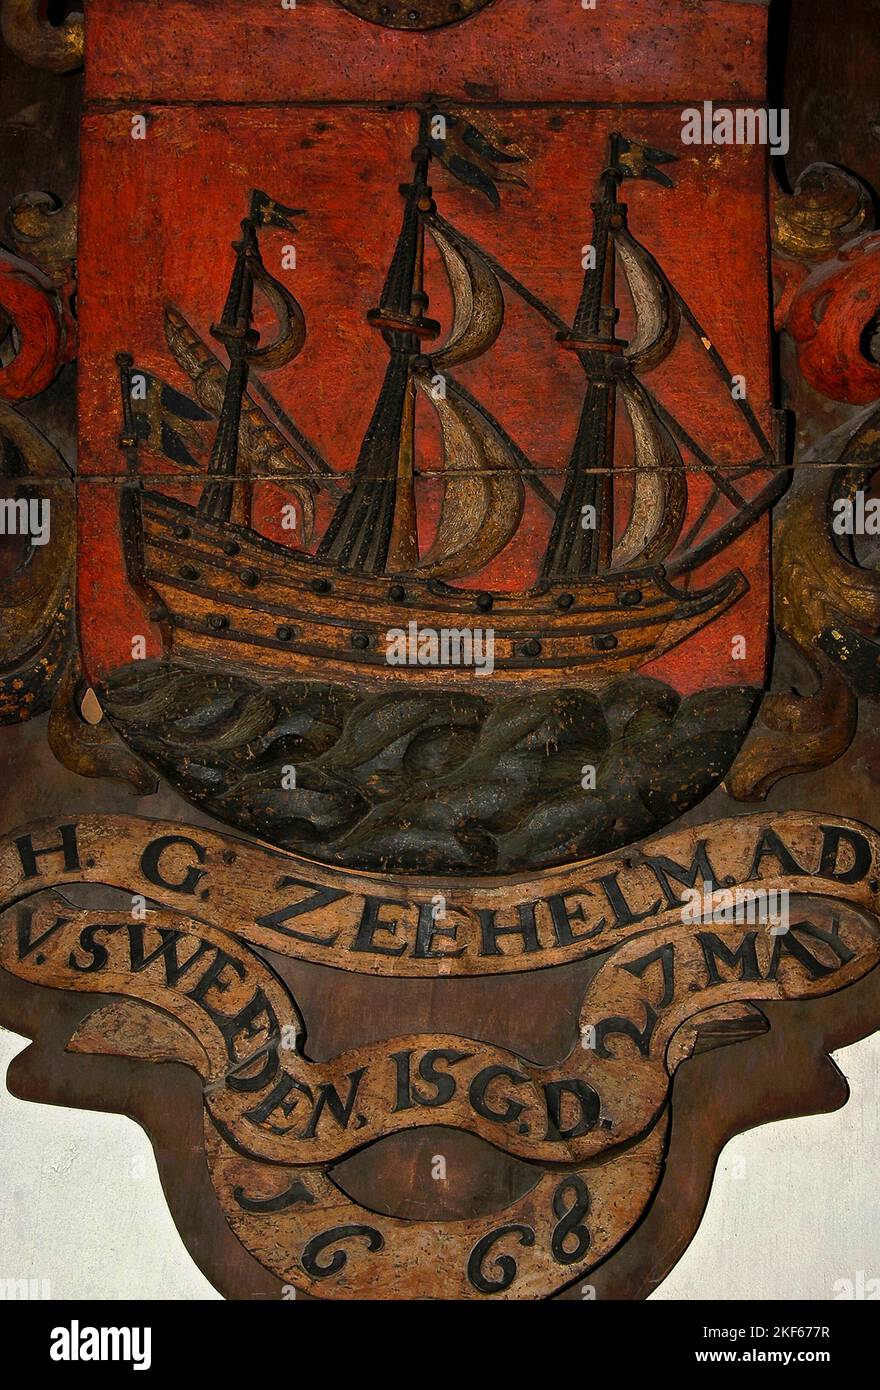 The Swedish flag flies from the masts and stern of this warship, painted on wood, marking the tomb of Dutch admiral Hendrick Gerritsz Zeehelm (died 1668), in the Oude Kerk (Old Church) in Ouderkerksplein, Amsterdam, North Holland, Netherlands.  Admiral Zeehelm served the Dutch Republic, Sweden and the Dutch colony of New Netherland on the east coast of North America. Stock Photo